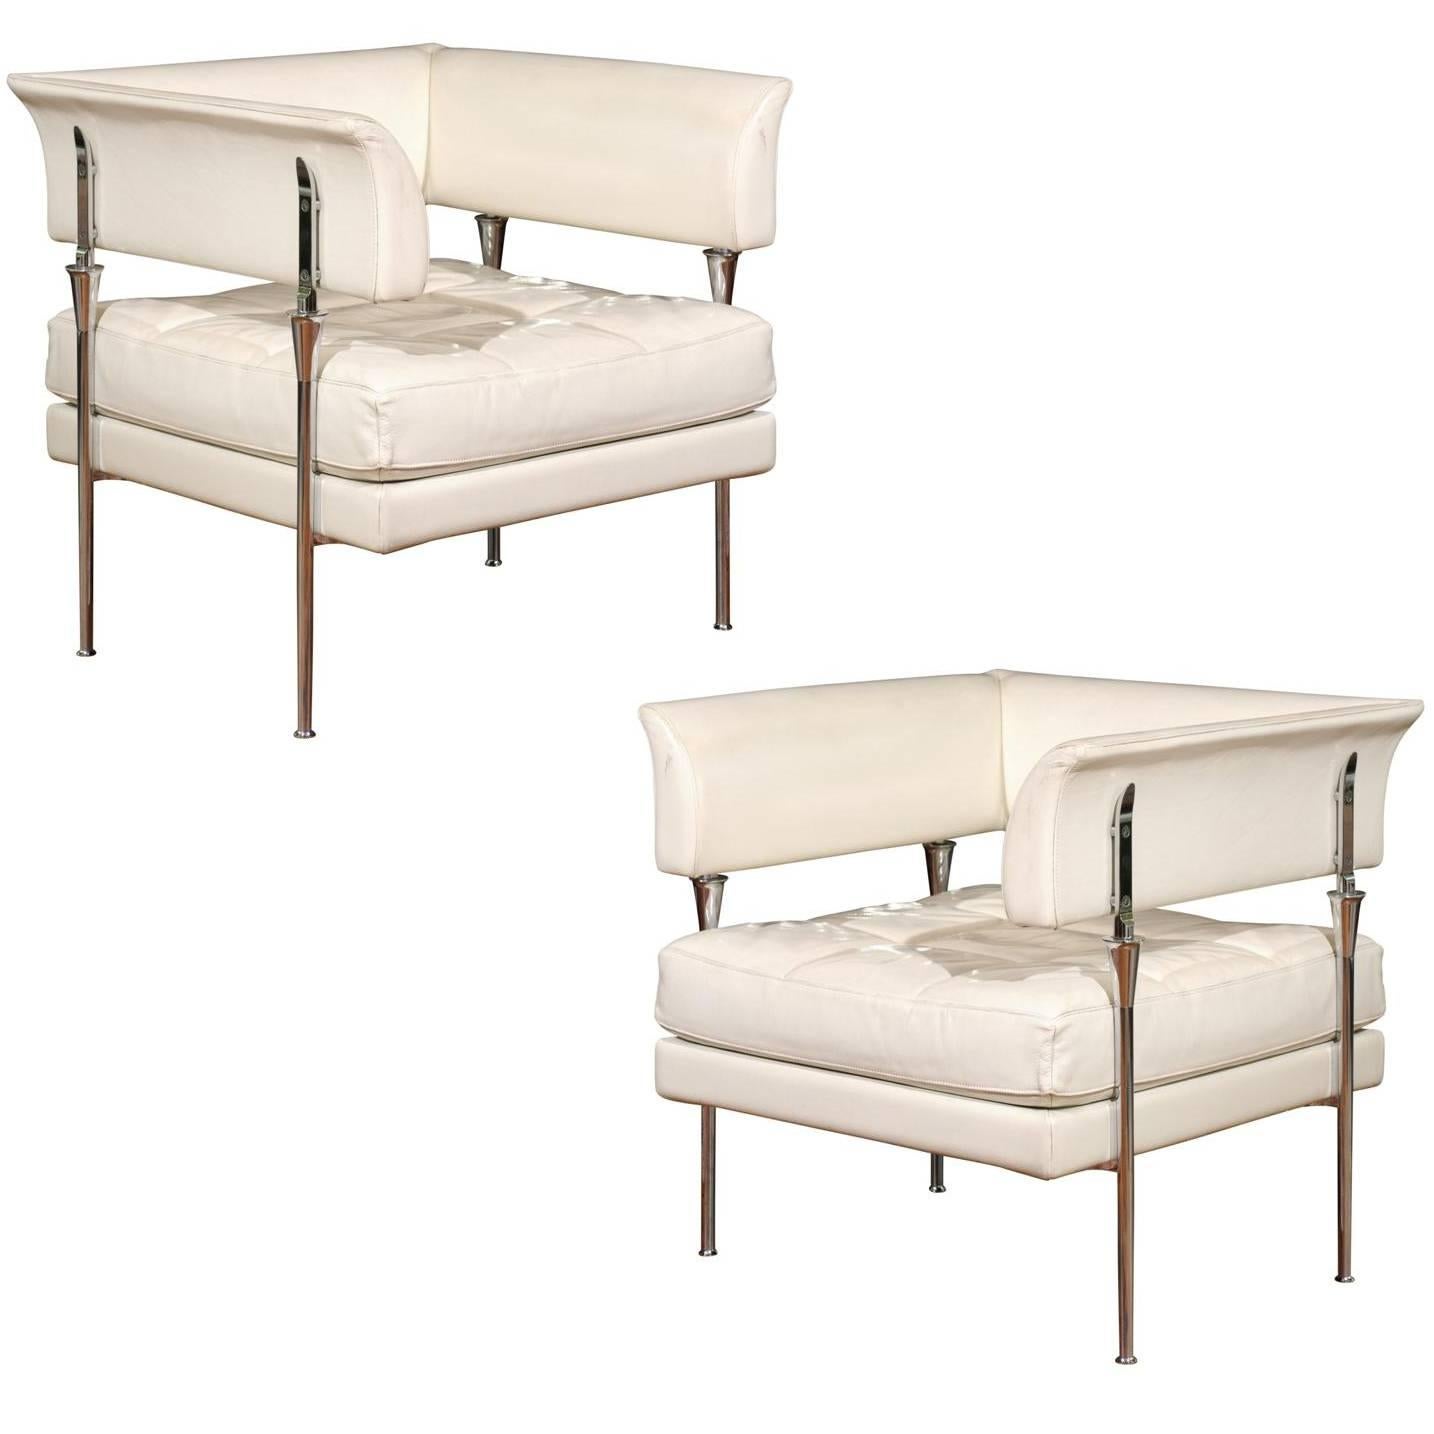 Pair of Italian Poltrona Frau Hydra Chairs, in Pelle Leather by Luca Scacchetti